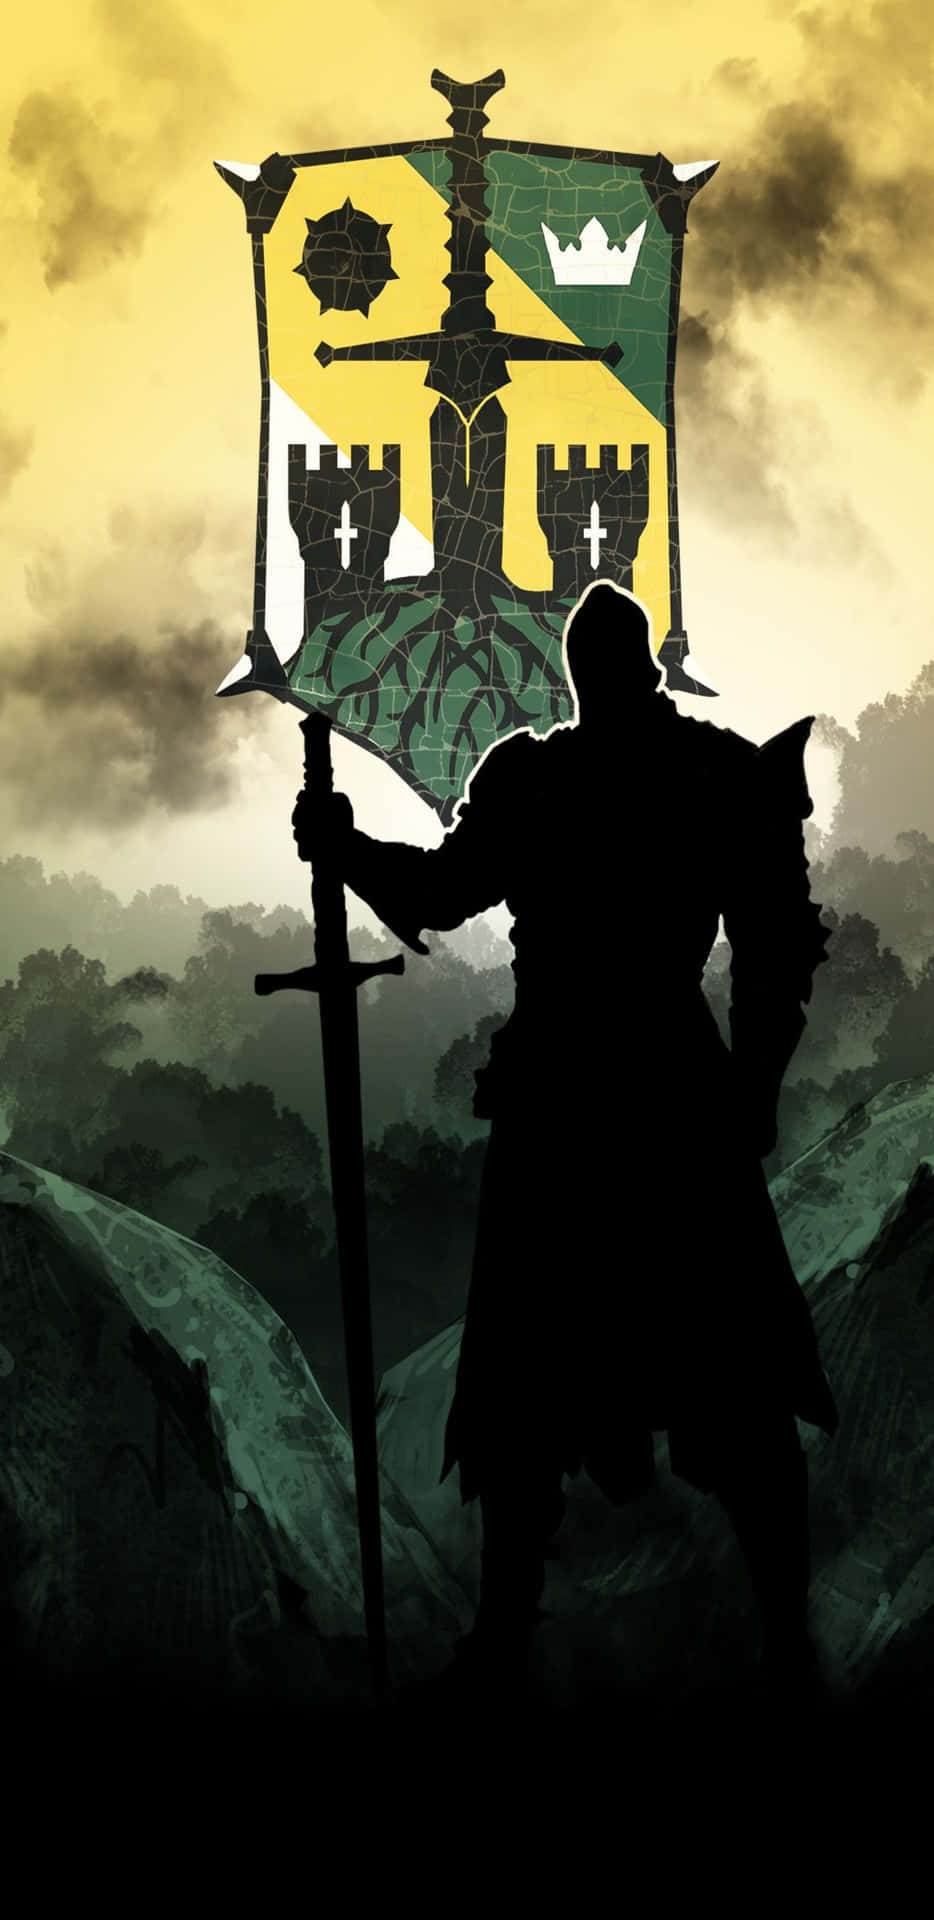 Pixel 3xl For Honor Warden Faction Background